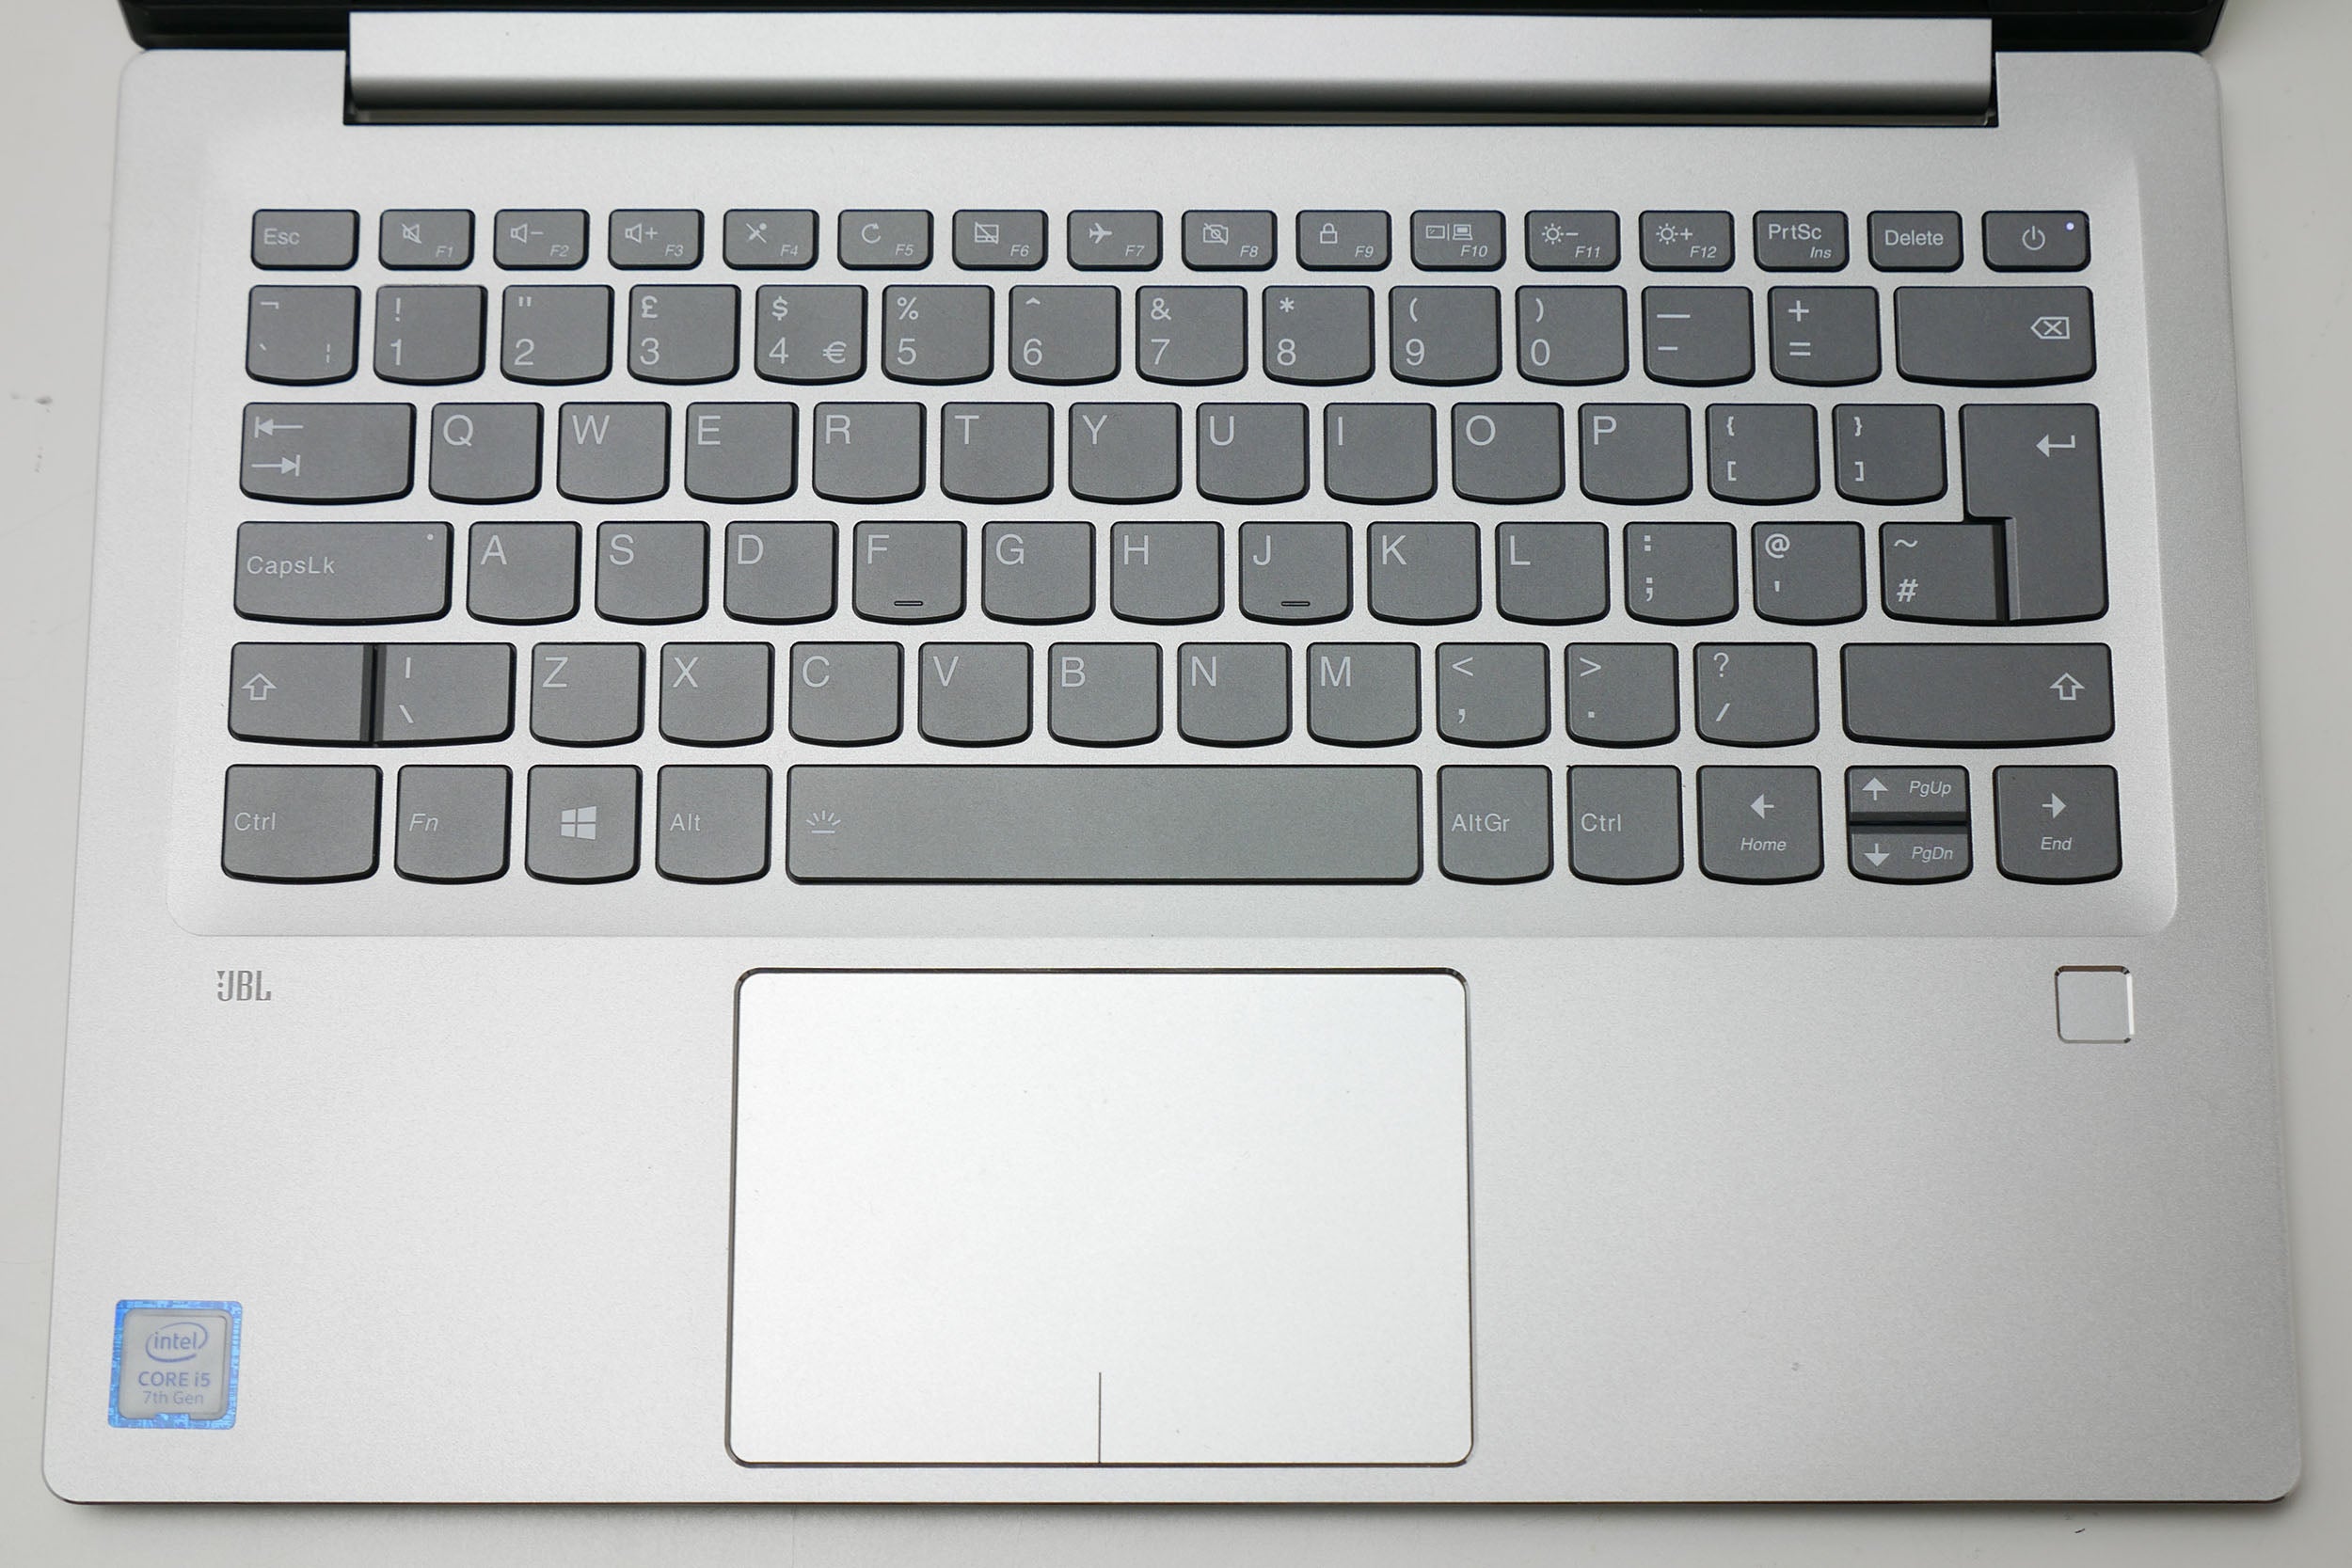 Lenovo IdeaPad 720S keyboard and touchpad close-up.